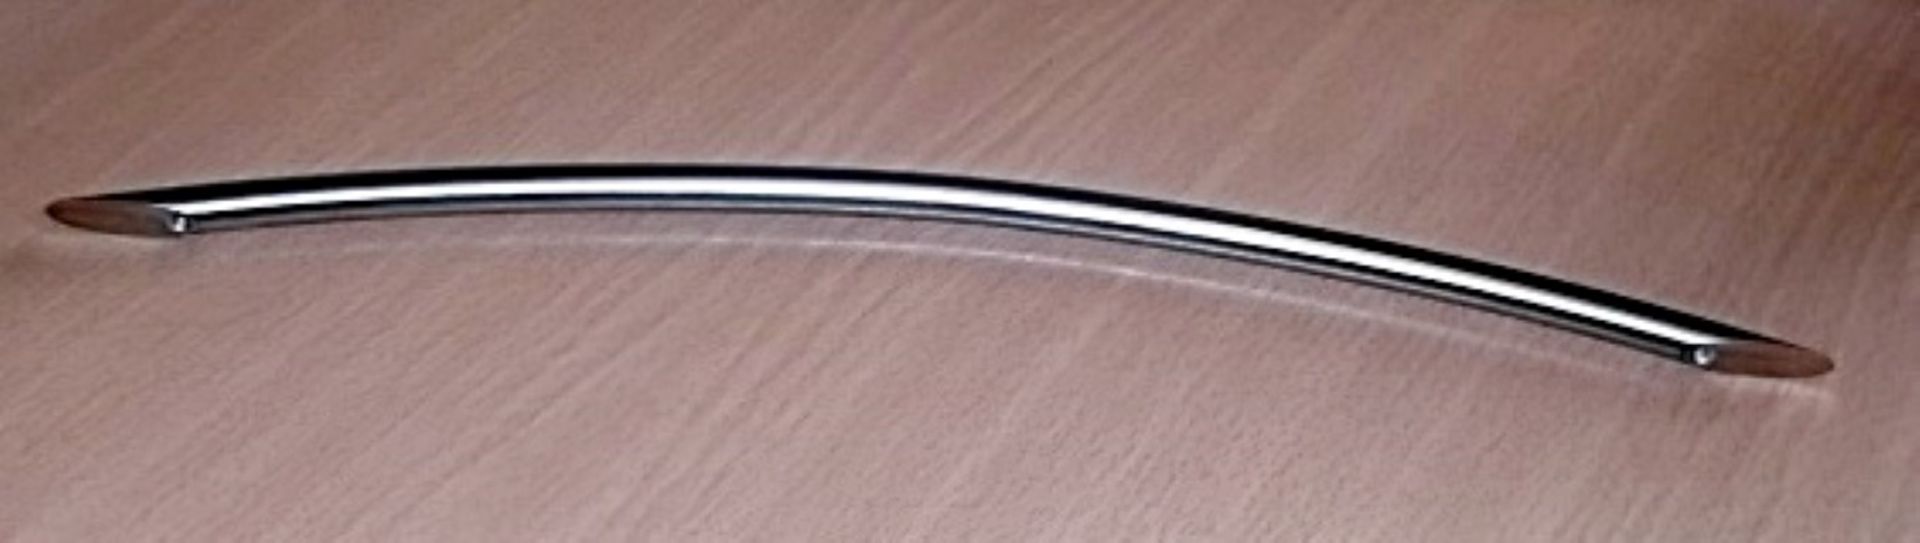 50 x BOW Handle Kitchen Door Handles - 320mm - New Stock - Brushed Nickel Finish - Fixings Included - Image 12 of 20